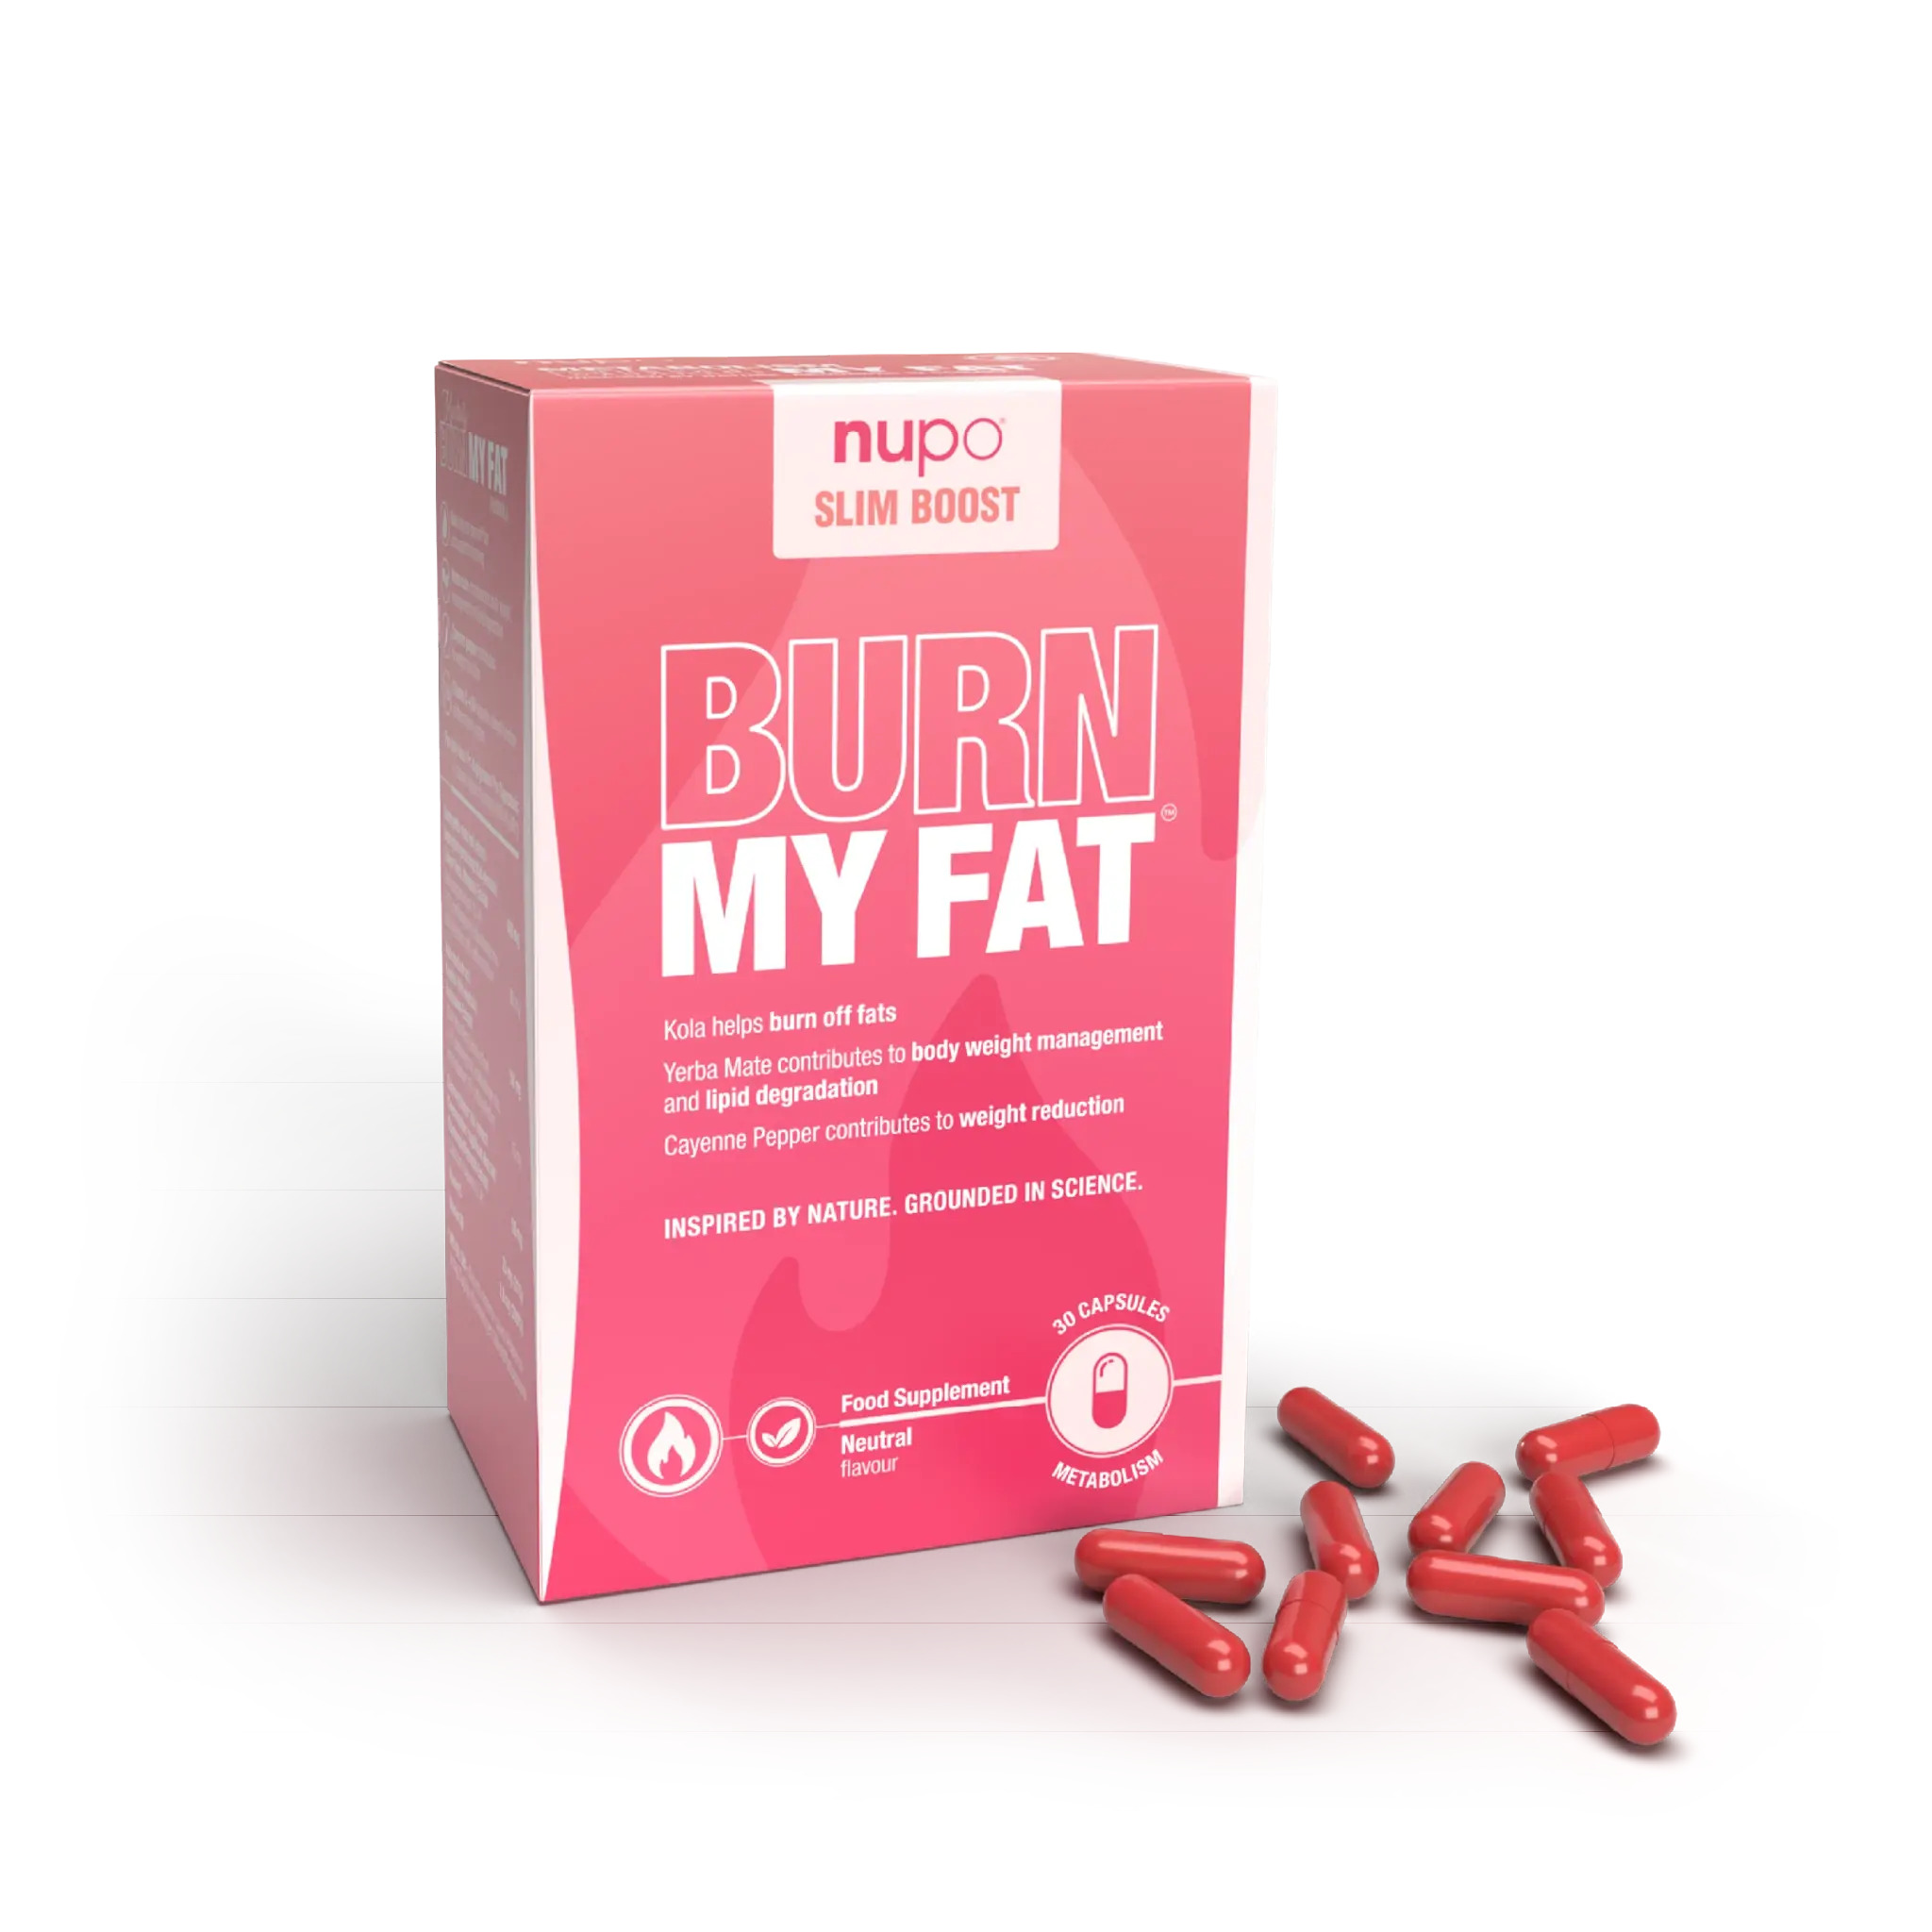 Slim Boost Burn My Fat, Boost Your Weight Loss